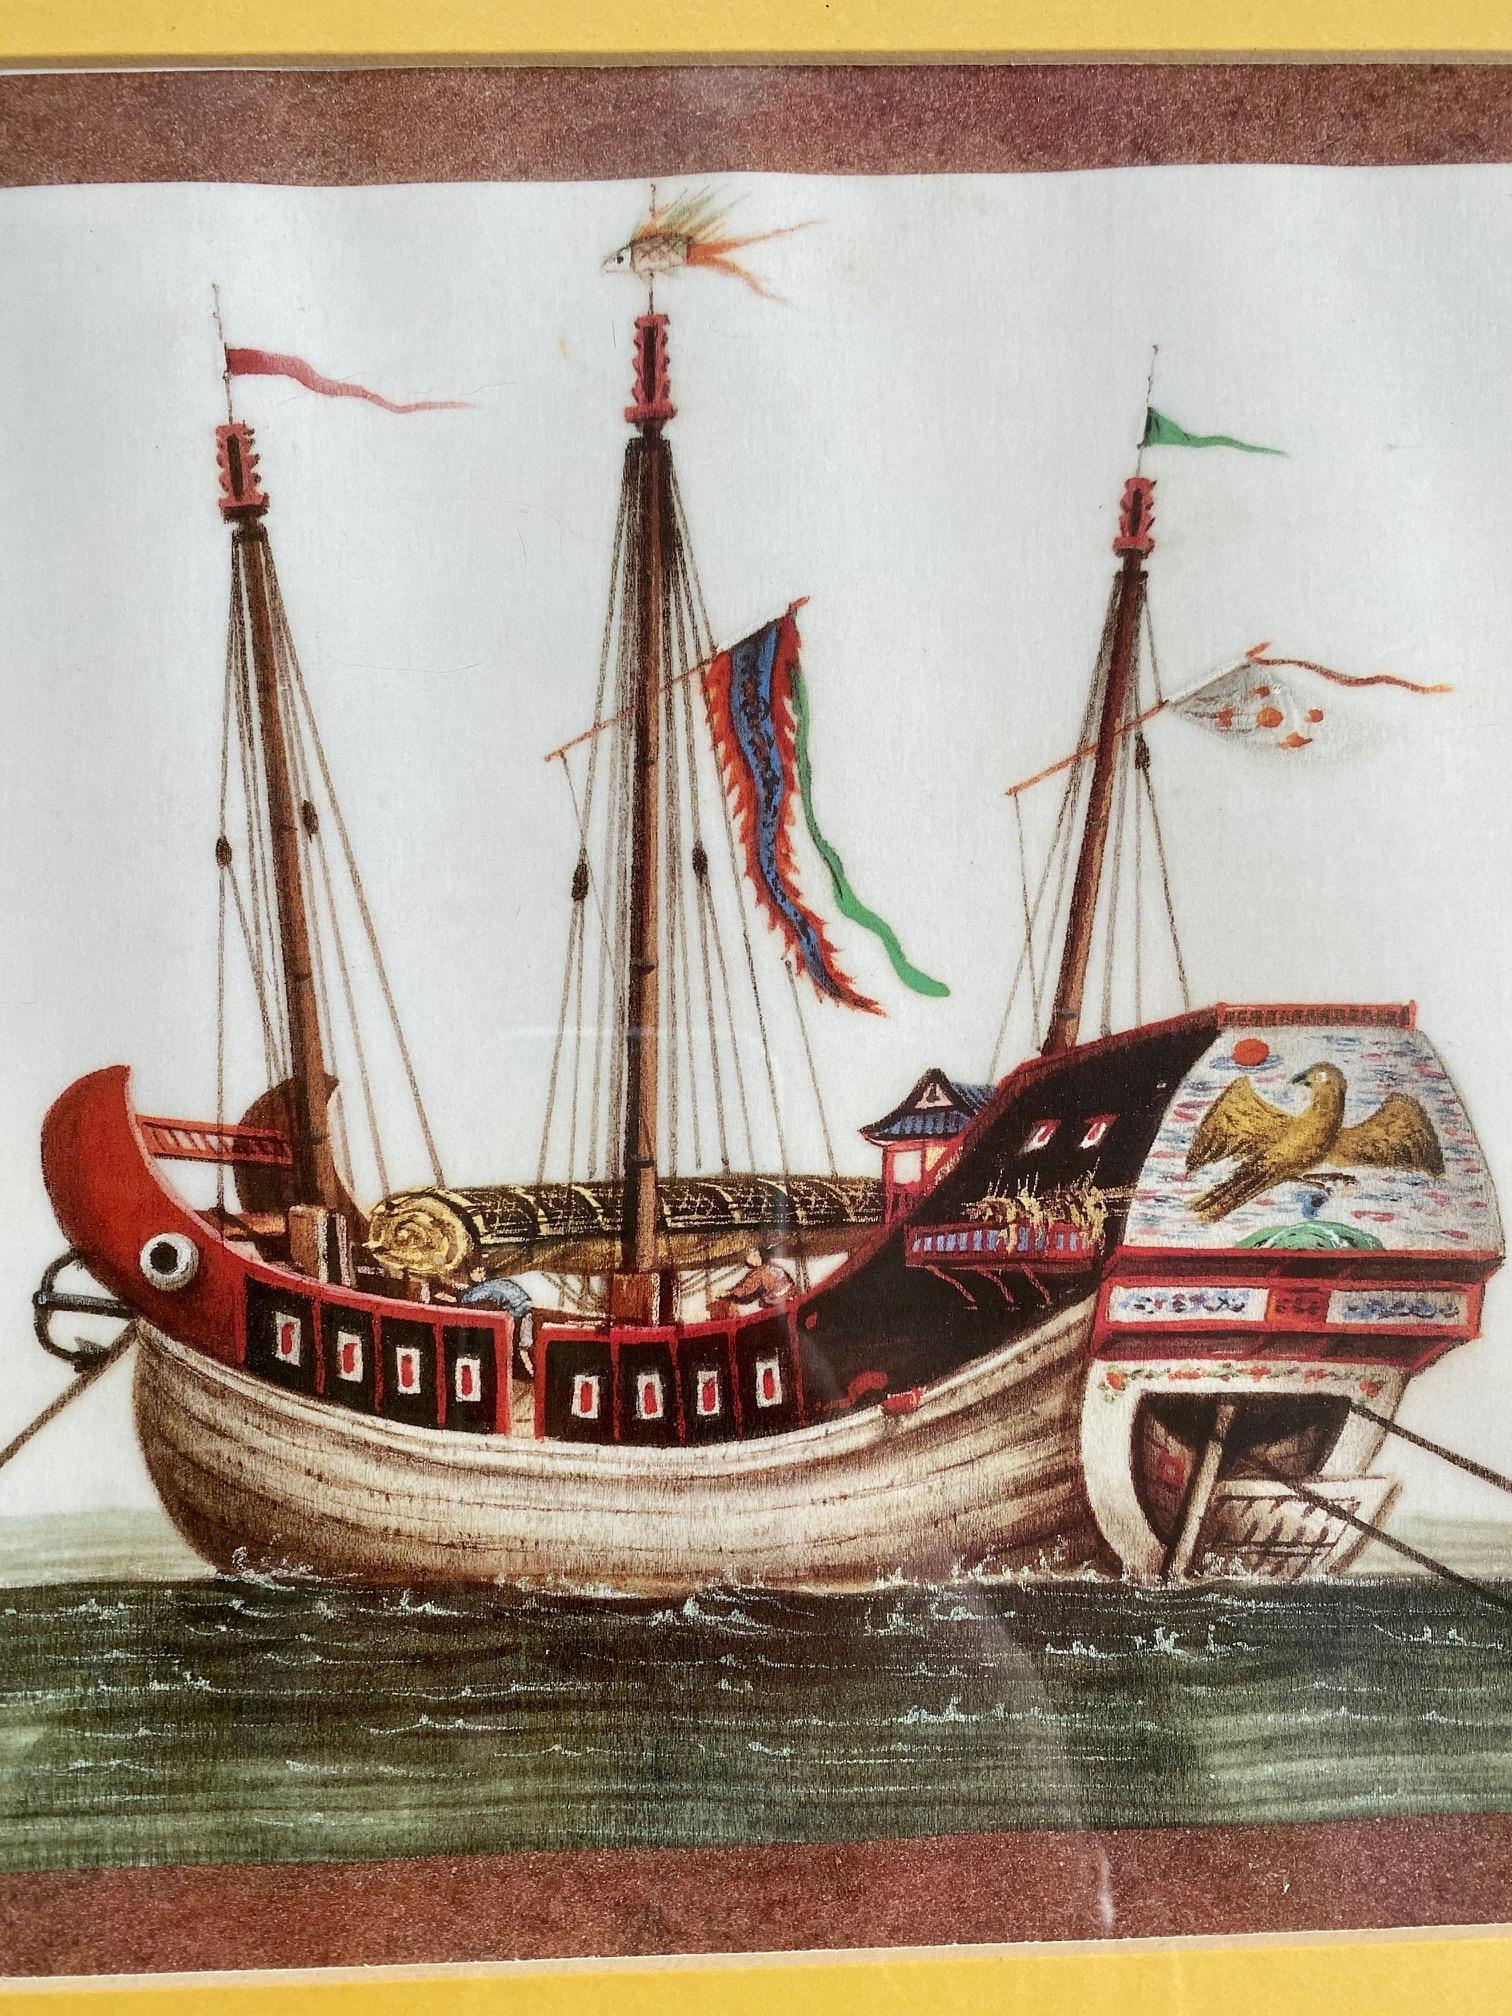 Early 19th century Chinese export pith painting of a junk, likely circa 1830s, having a very finely painted oil on pith paper view of an exquisite Junk with dramatic shear, elaborately carved gunnel and transom, decorative paintwork, furled sails,